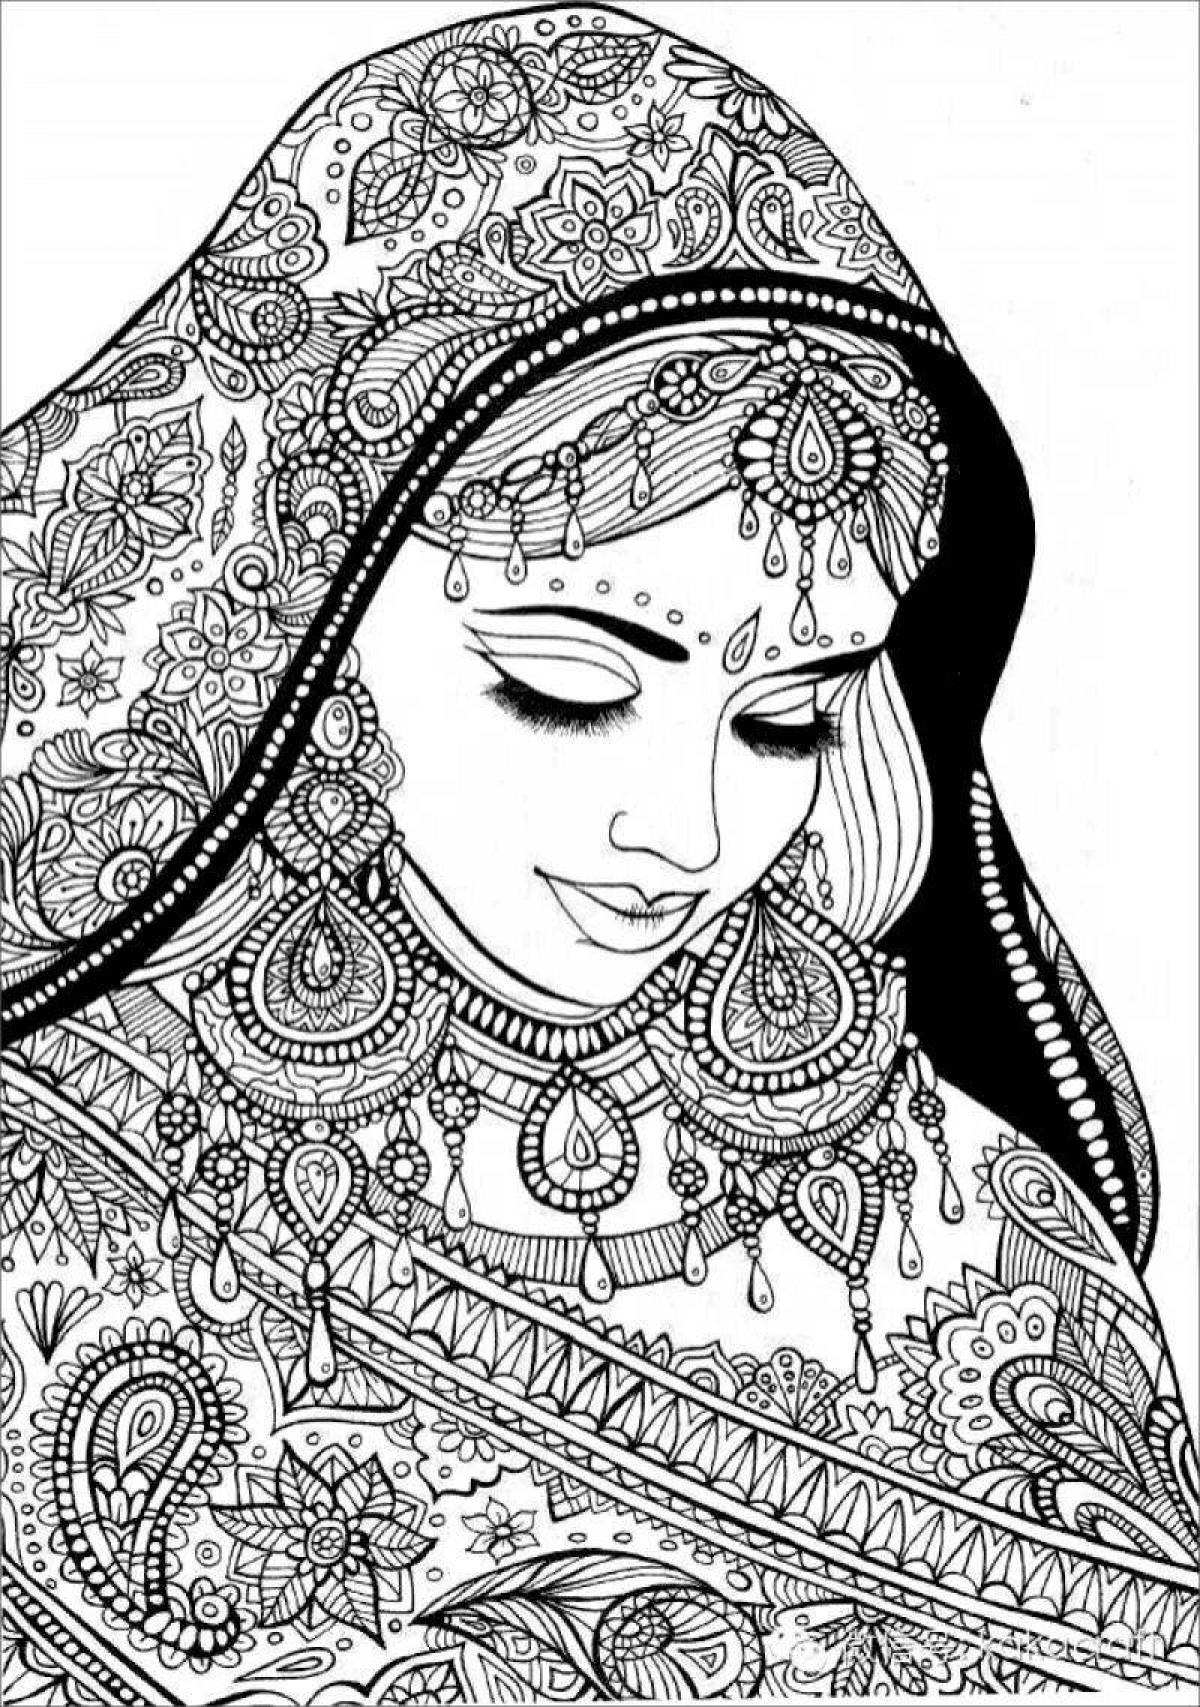 Intriguing coloring pages for adults